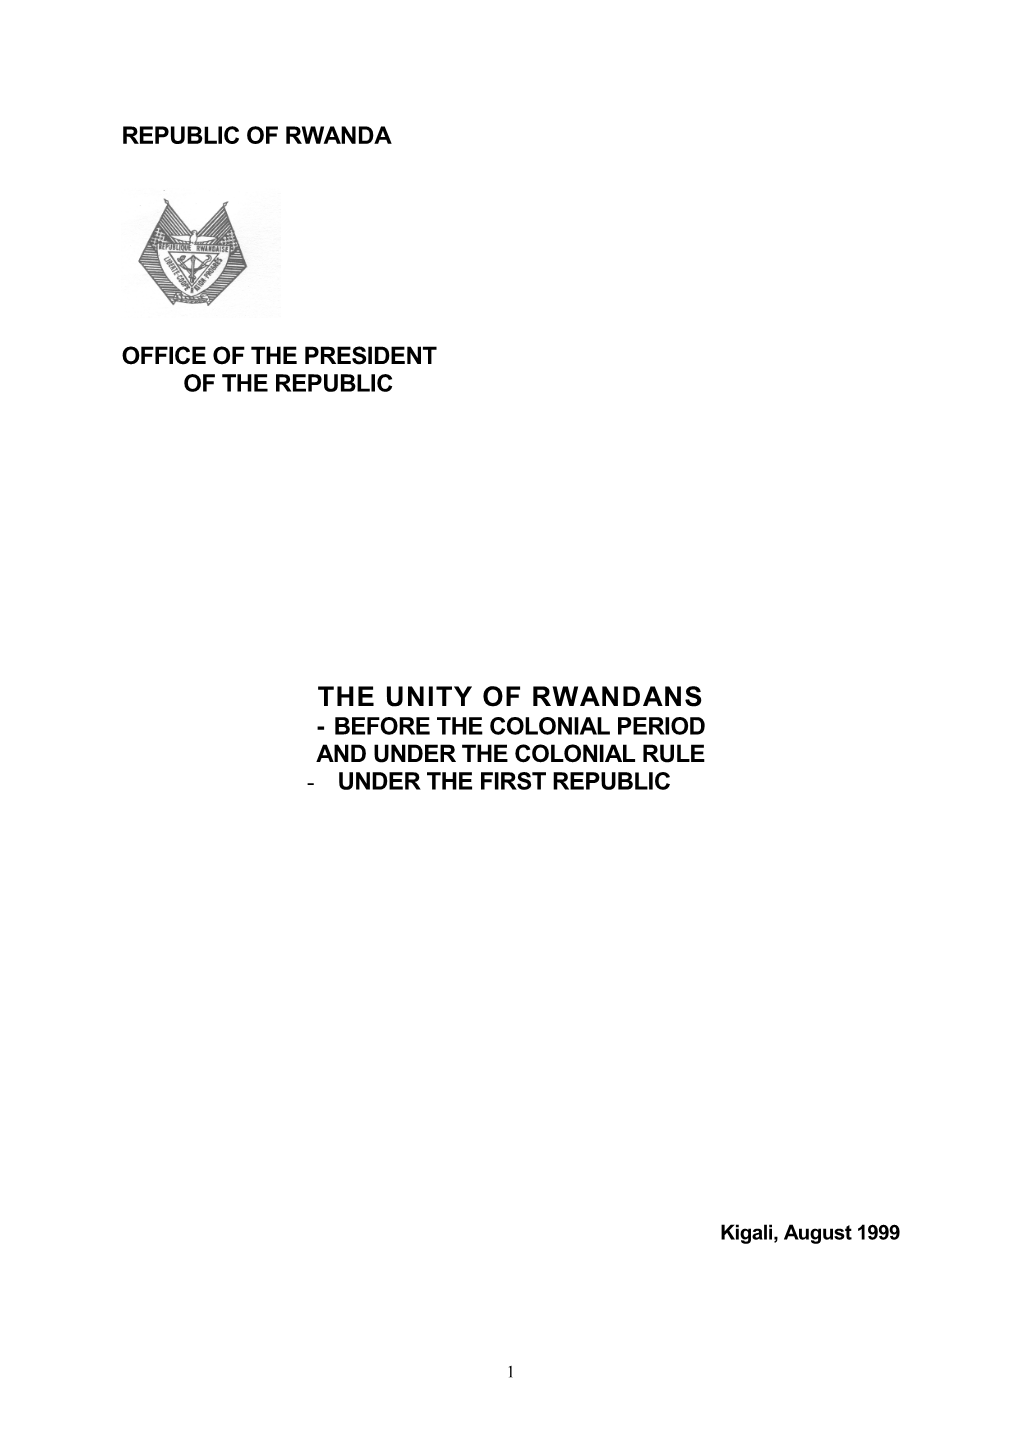 The Unity of Rwandans Before the Colonial Period and Under The